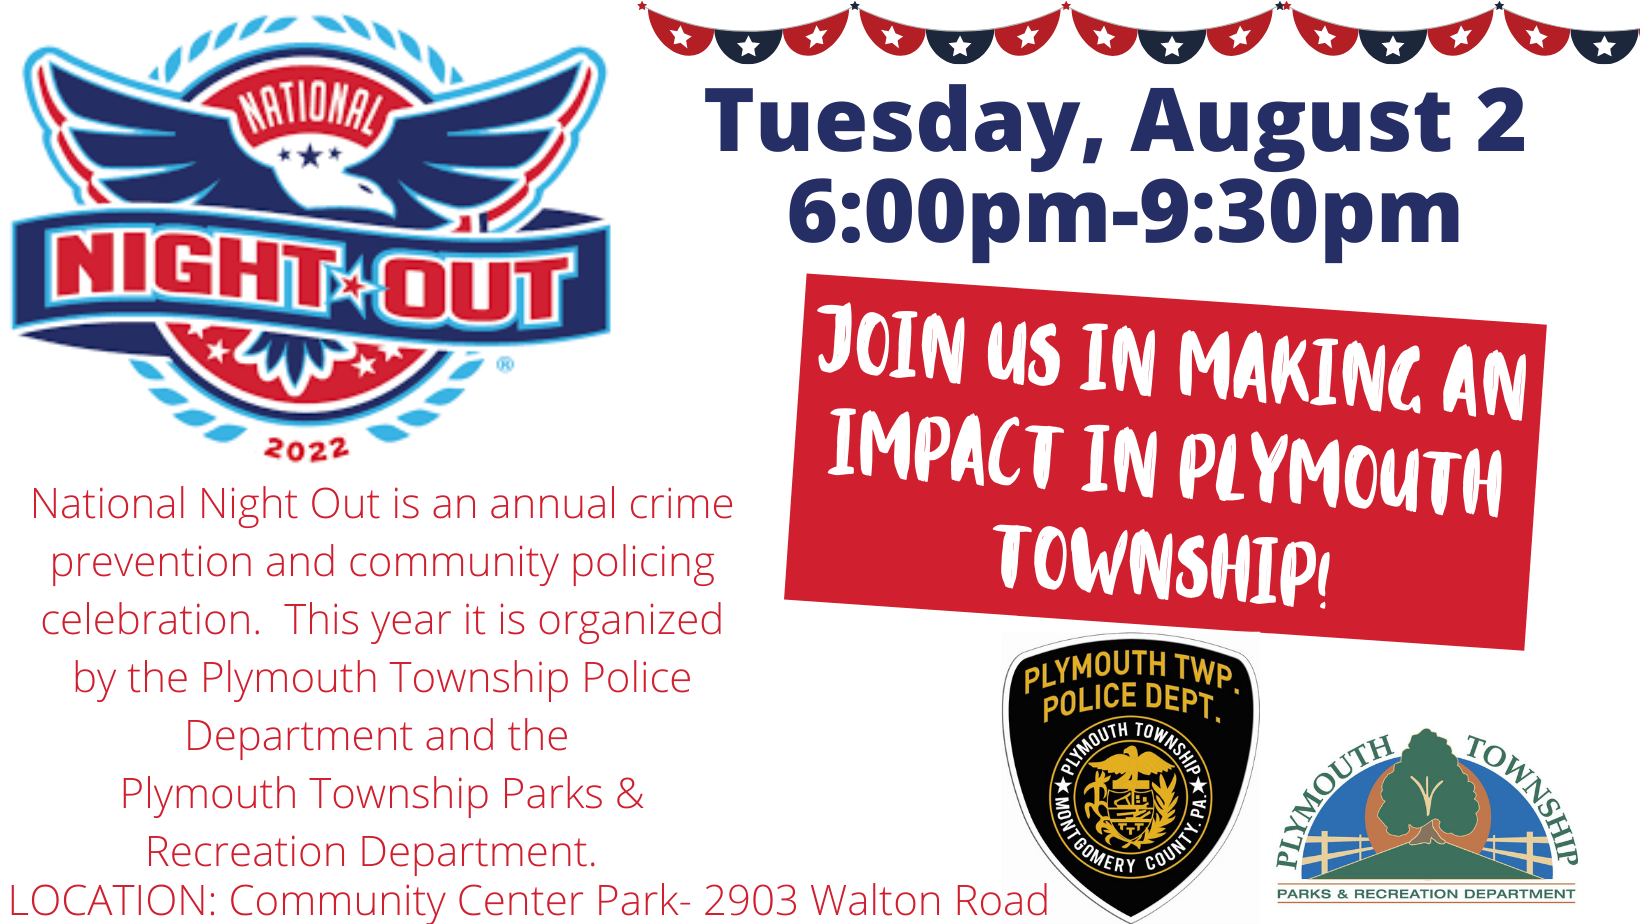 National Night Out @ Greater Plymouth Community Center- Park